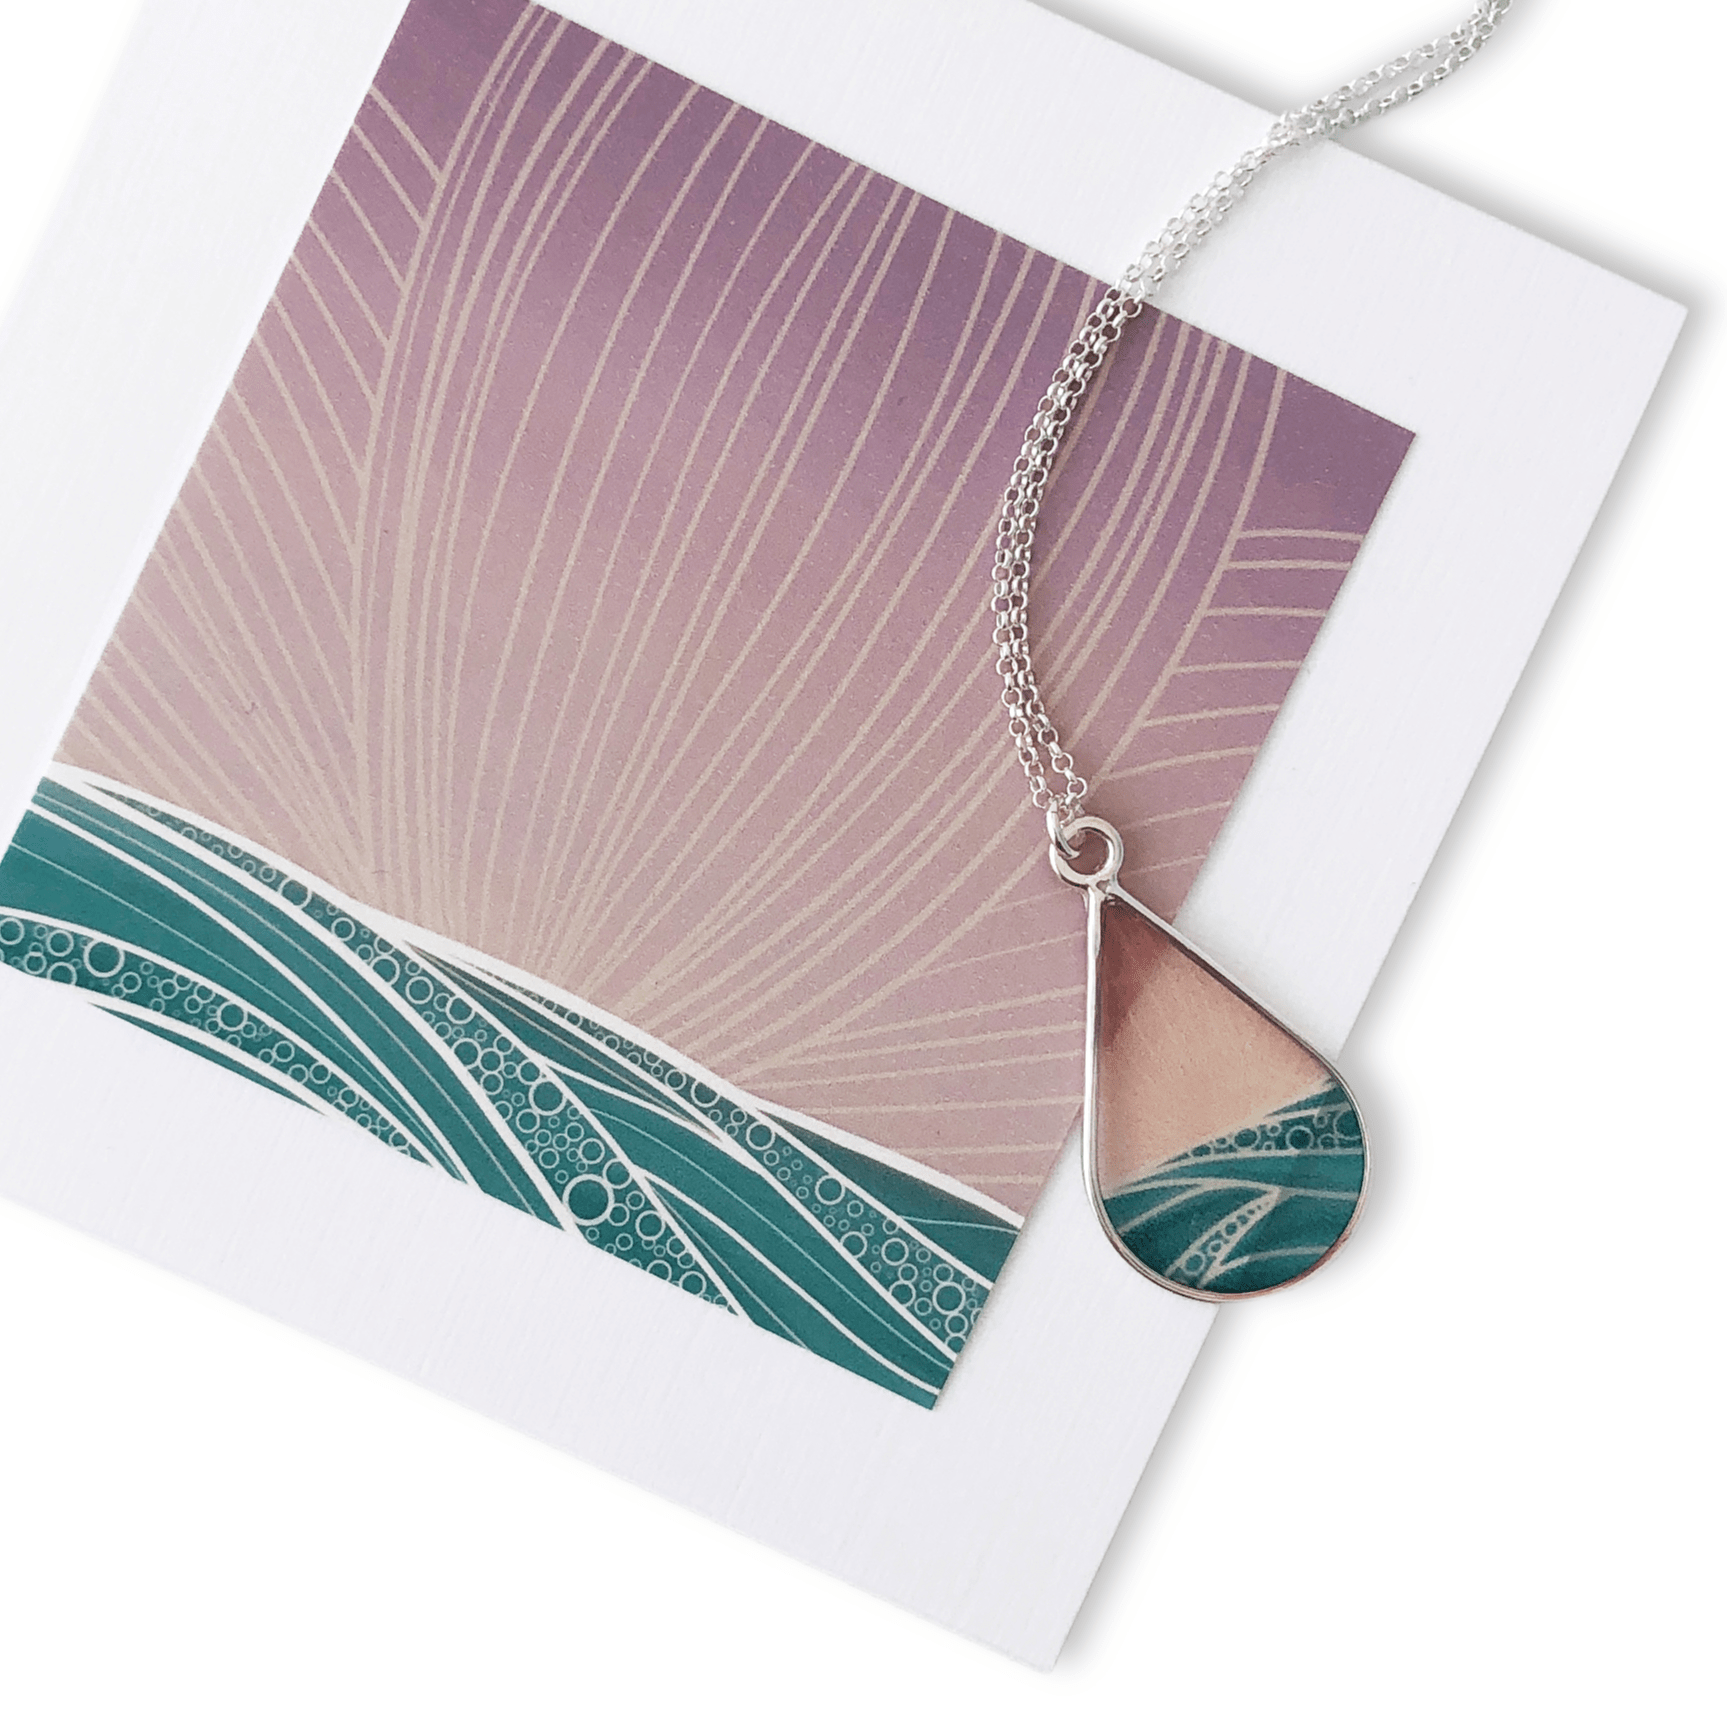 Bethany Strickland Art Necklace with Hawaiian Sunset Painting